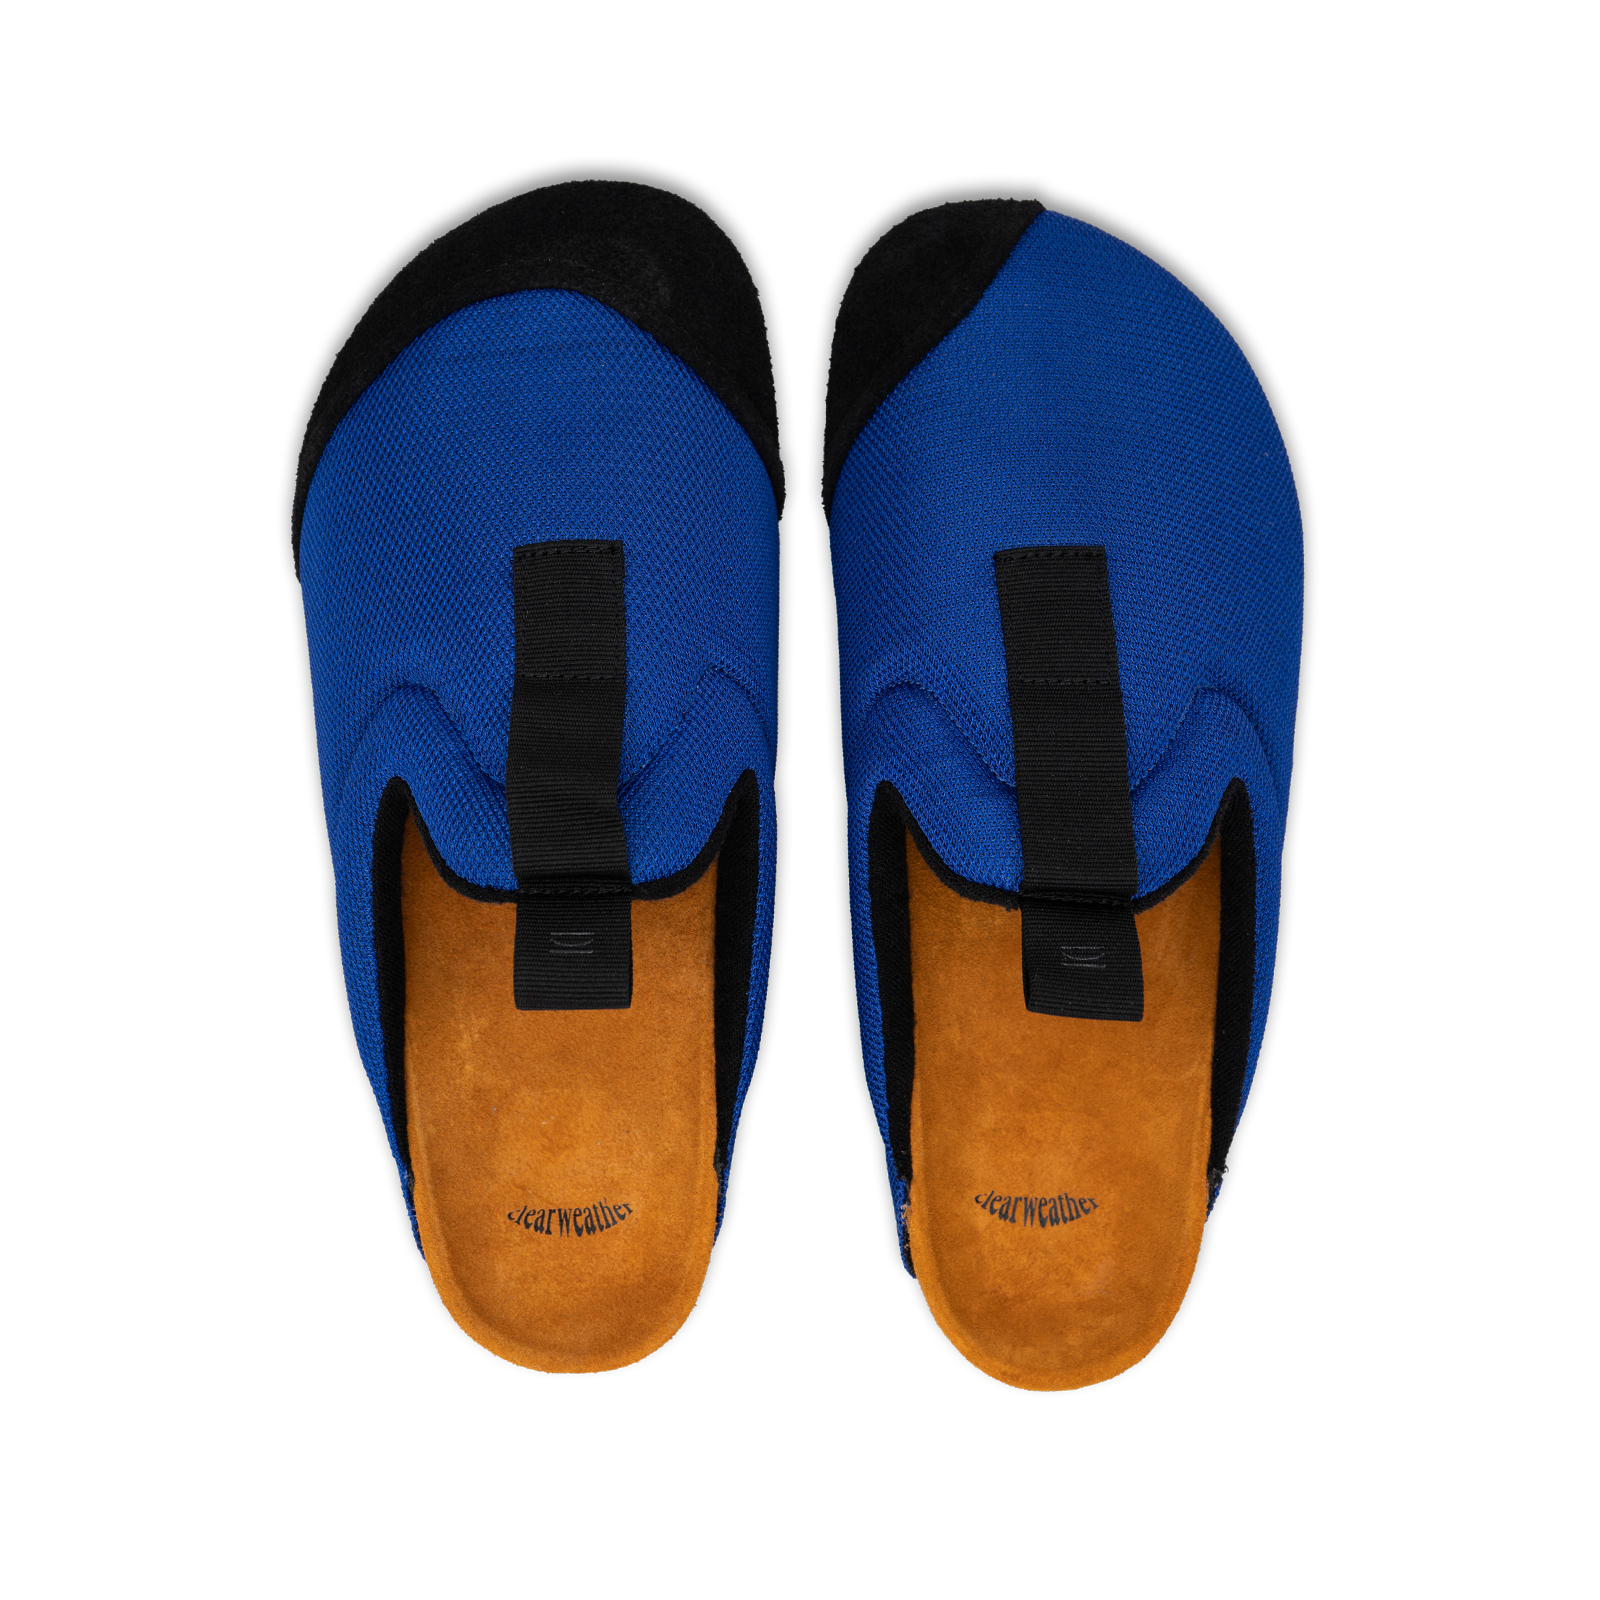 top view Bantha 2.0 Royal is a Mule made of Royal Blue mesh with a Black hairy suede to overlay, cork midsole with suede top lining Black VIbram rubber bottom and woven top pull